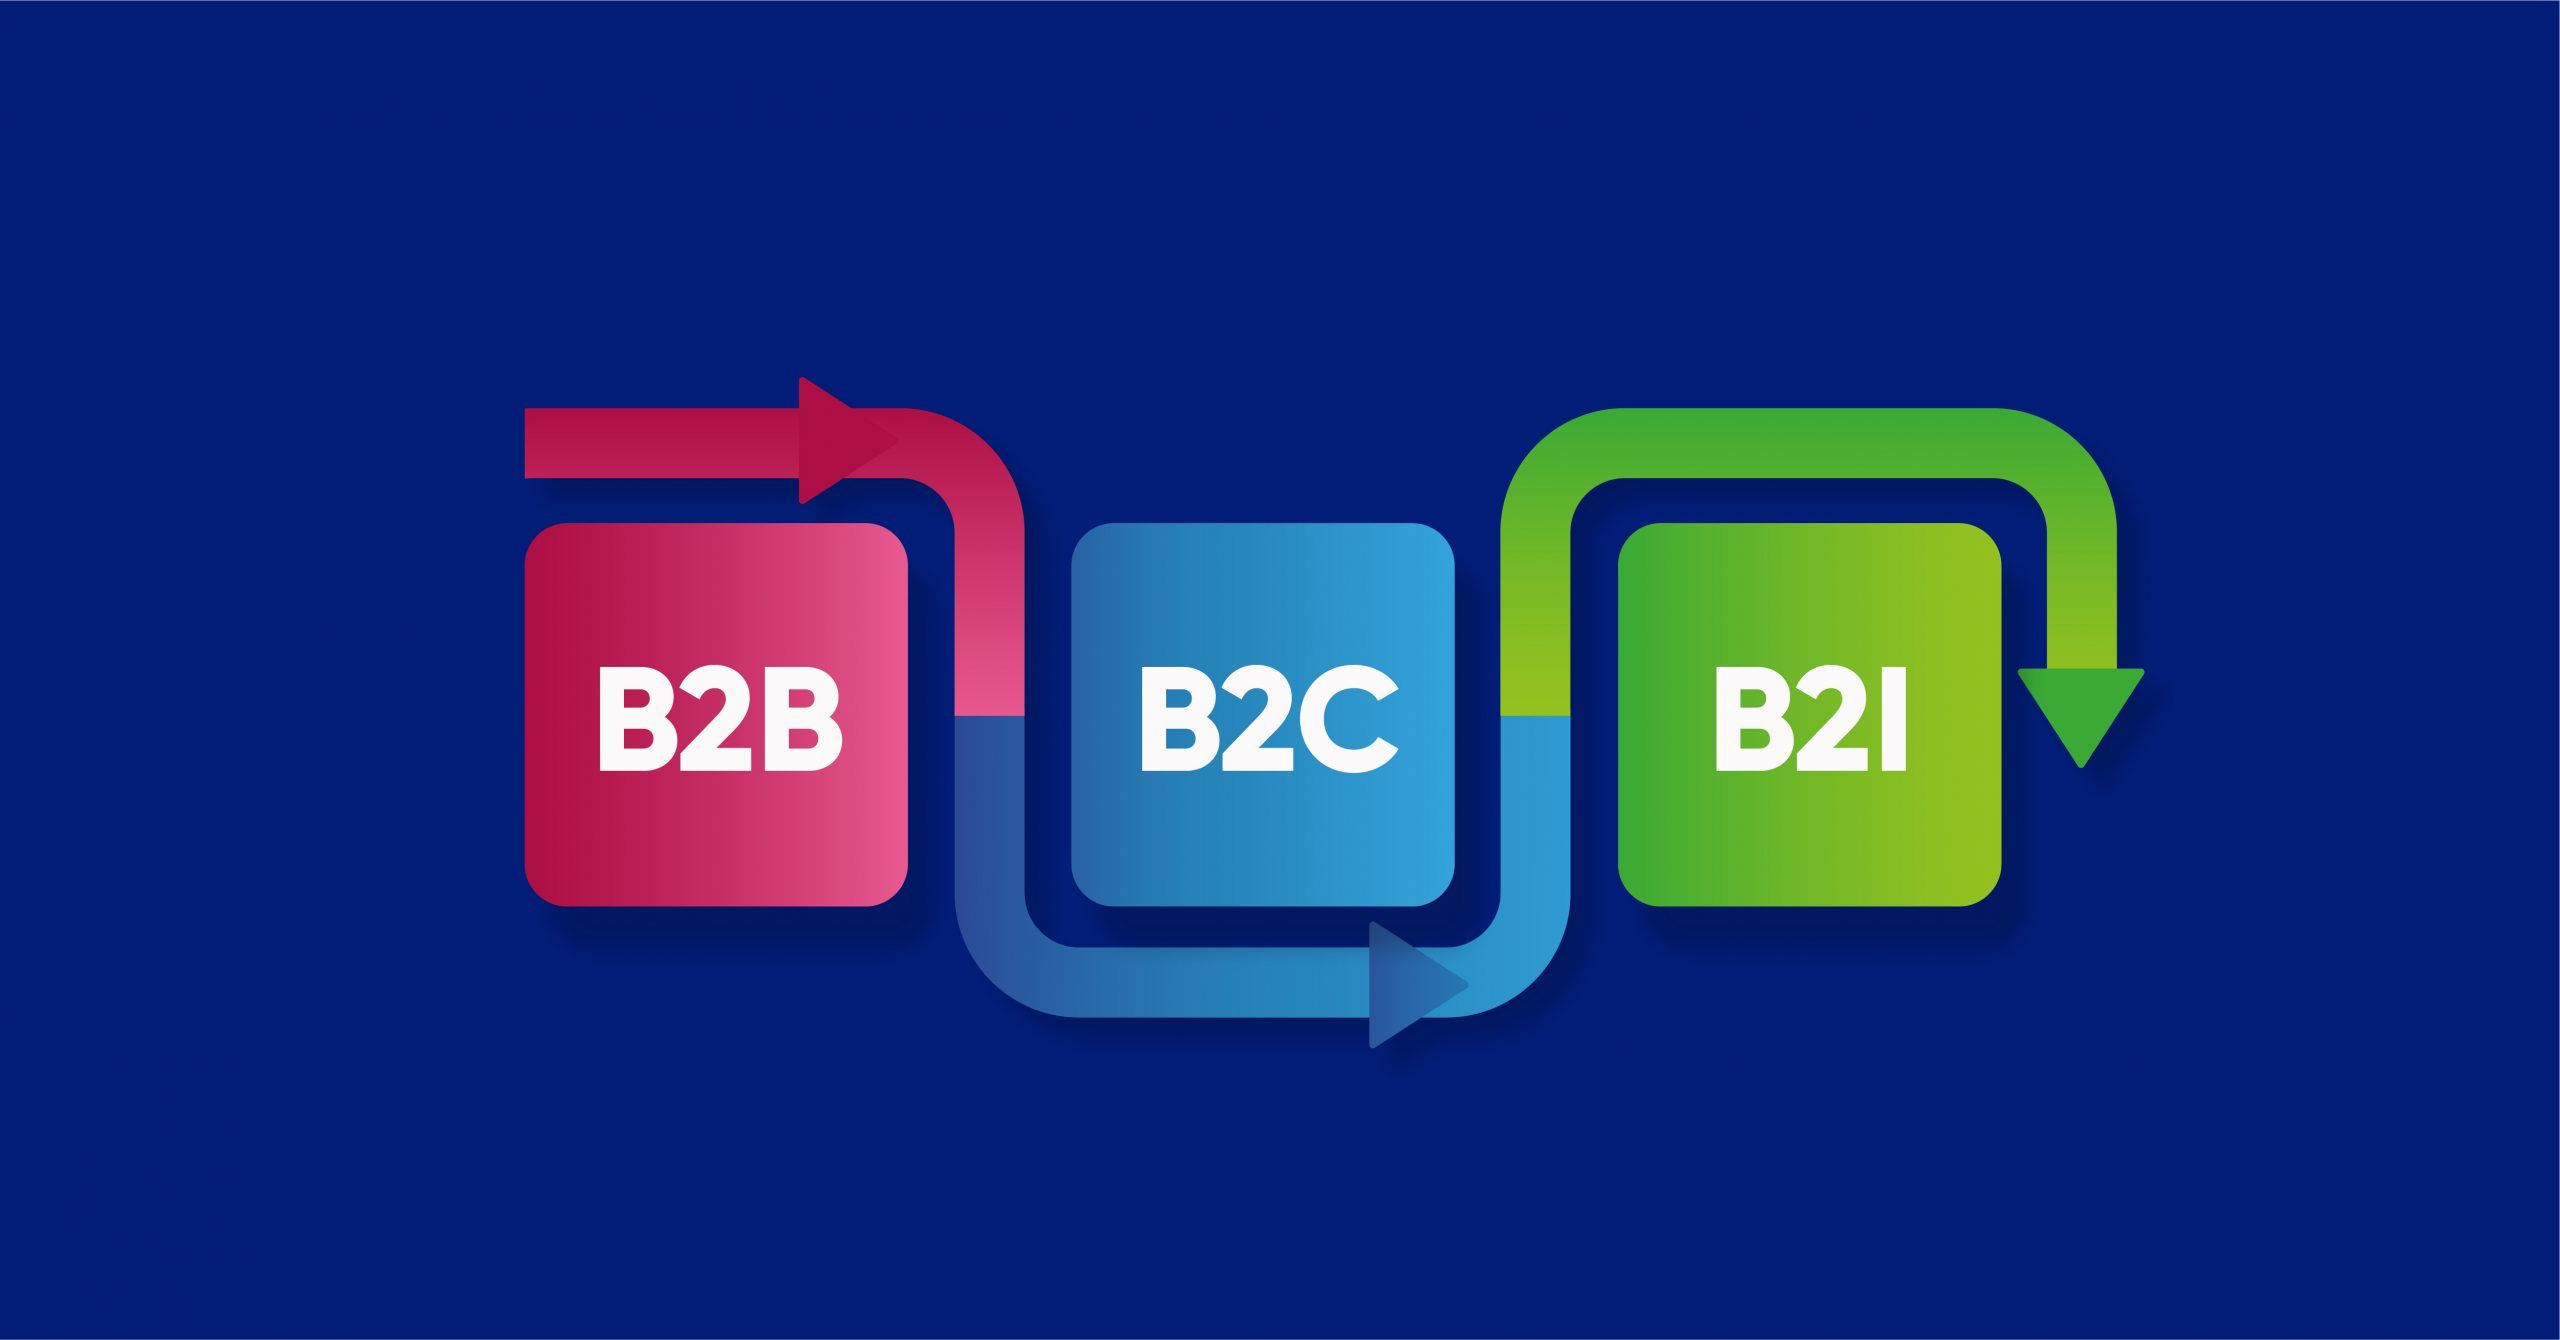 How To Combine B2B and B2C Marketing To Deliver a B2i Experience